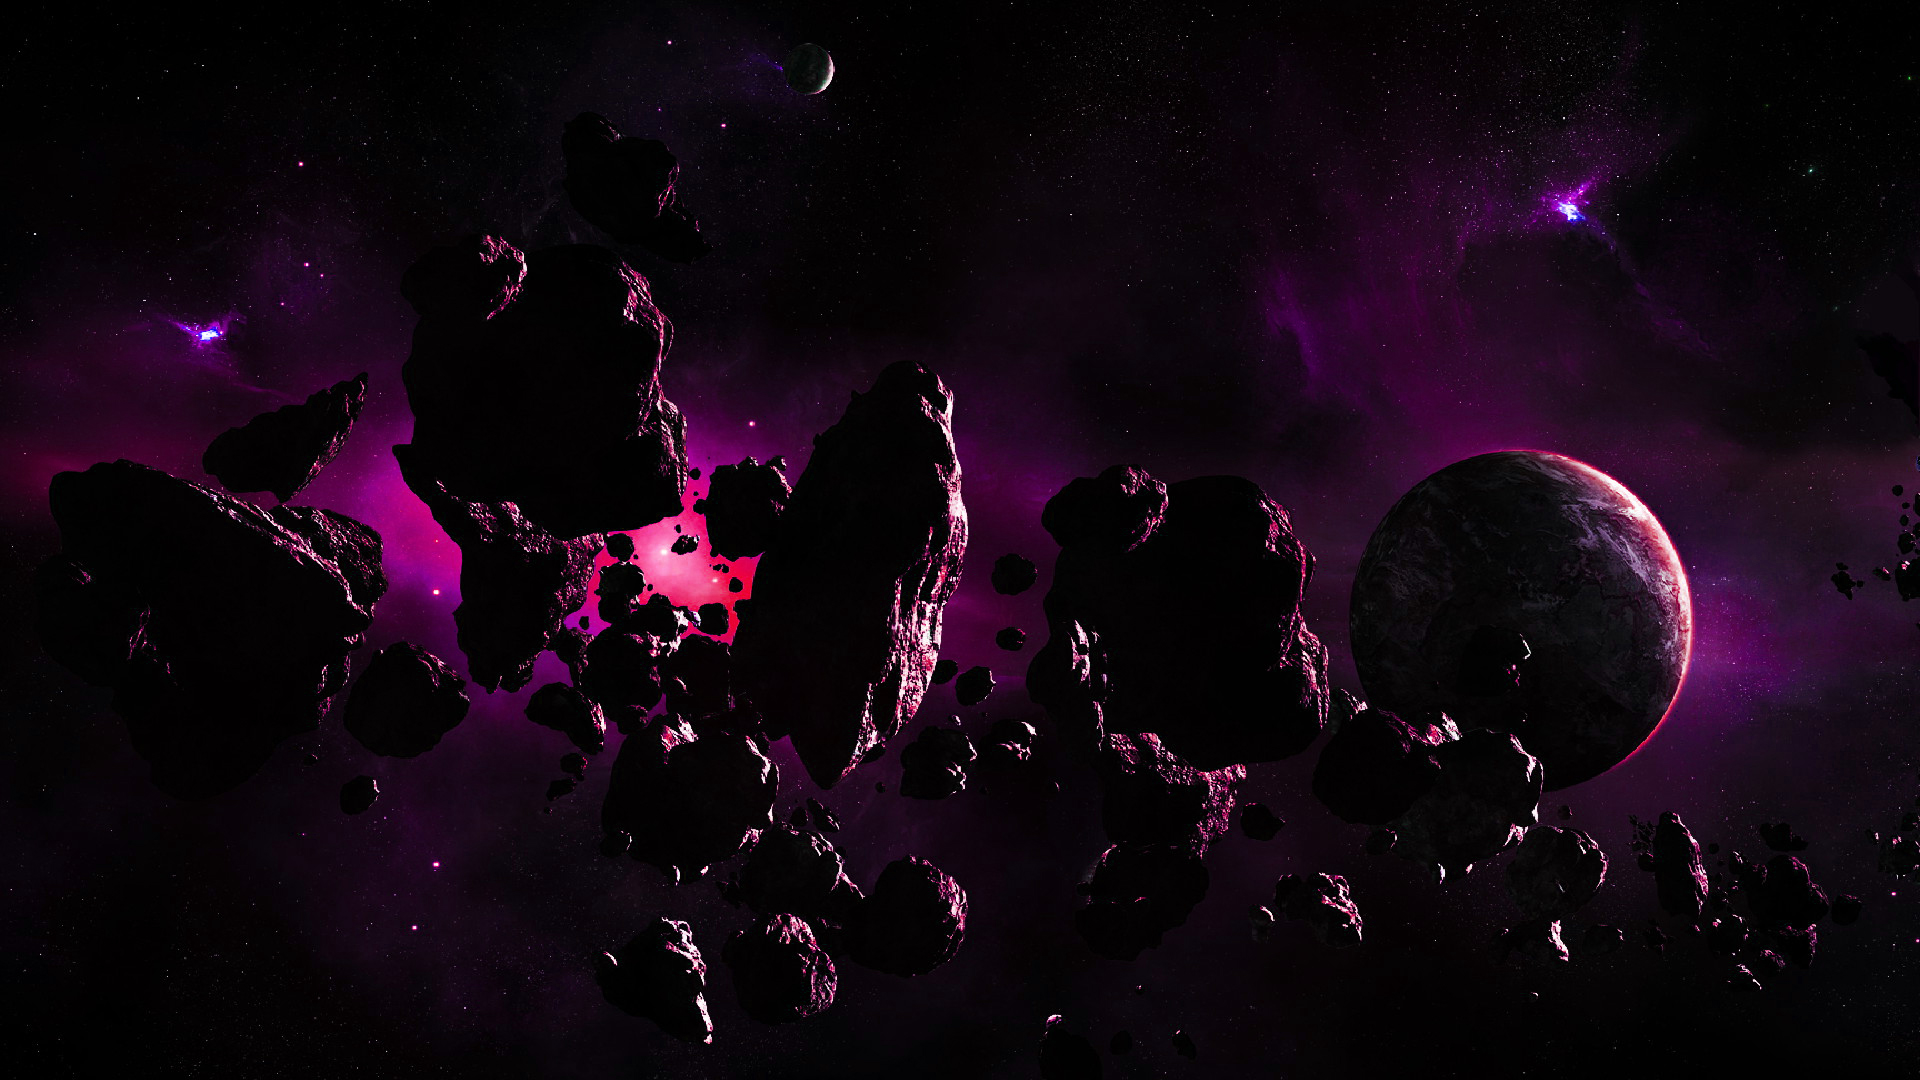 outer space, planets, astroid - desktop wallpaper